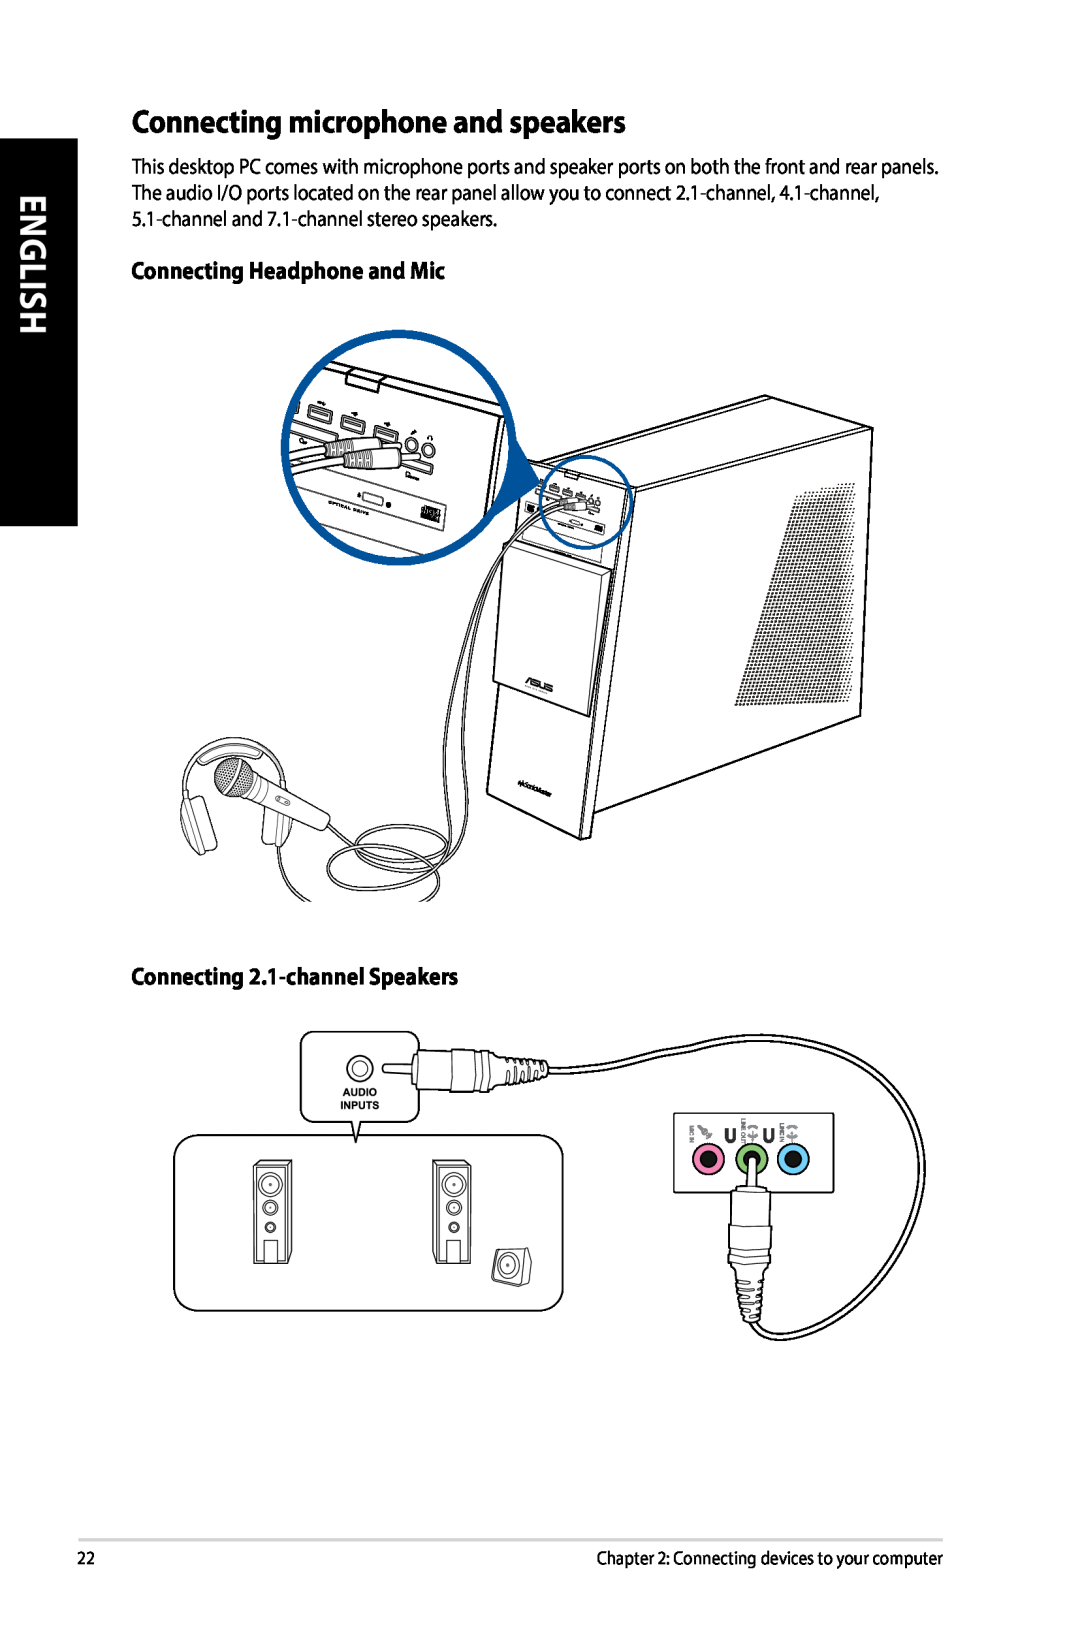 Asus G10AJ manual Connecting microphone and speakers, Connecting Headphone and Mic Connecting 2.1-channel Speakers, English 